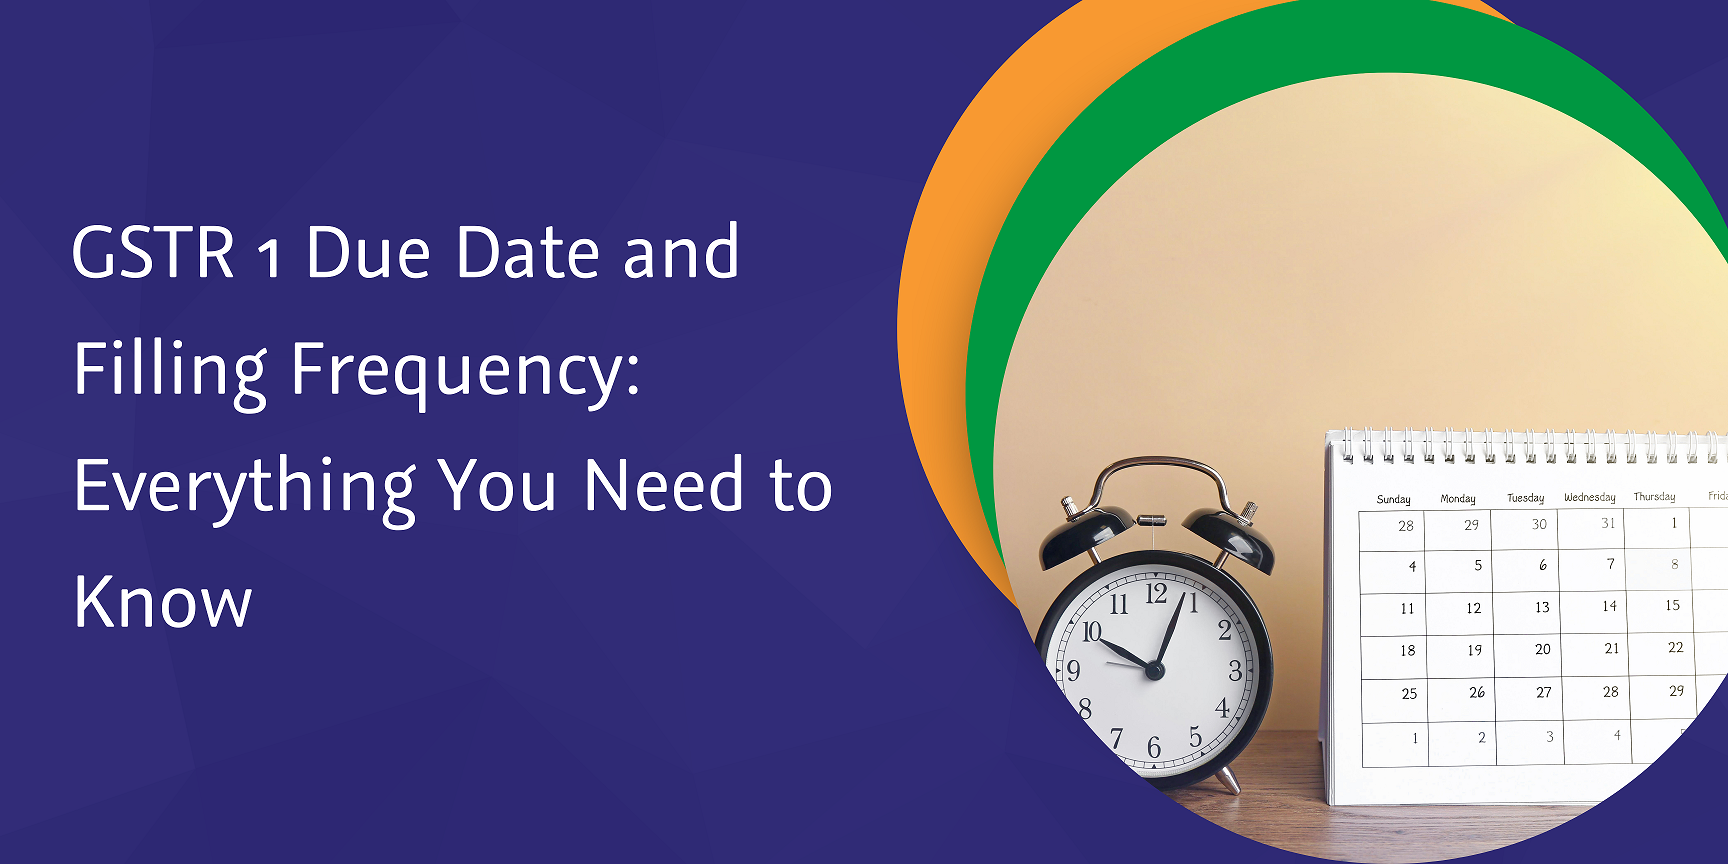 gstr 1 due date and filling frequency